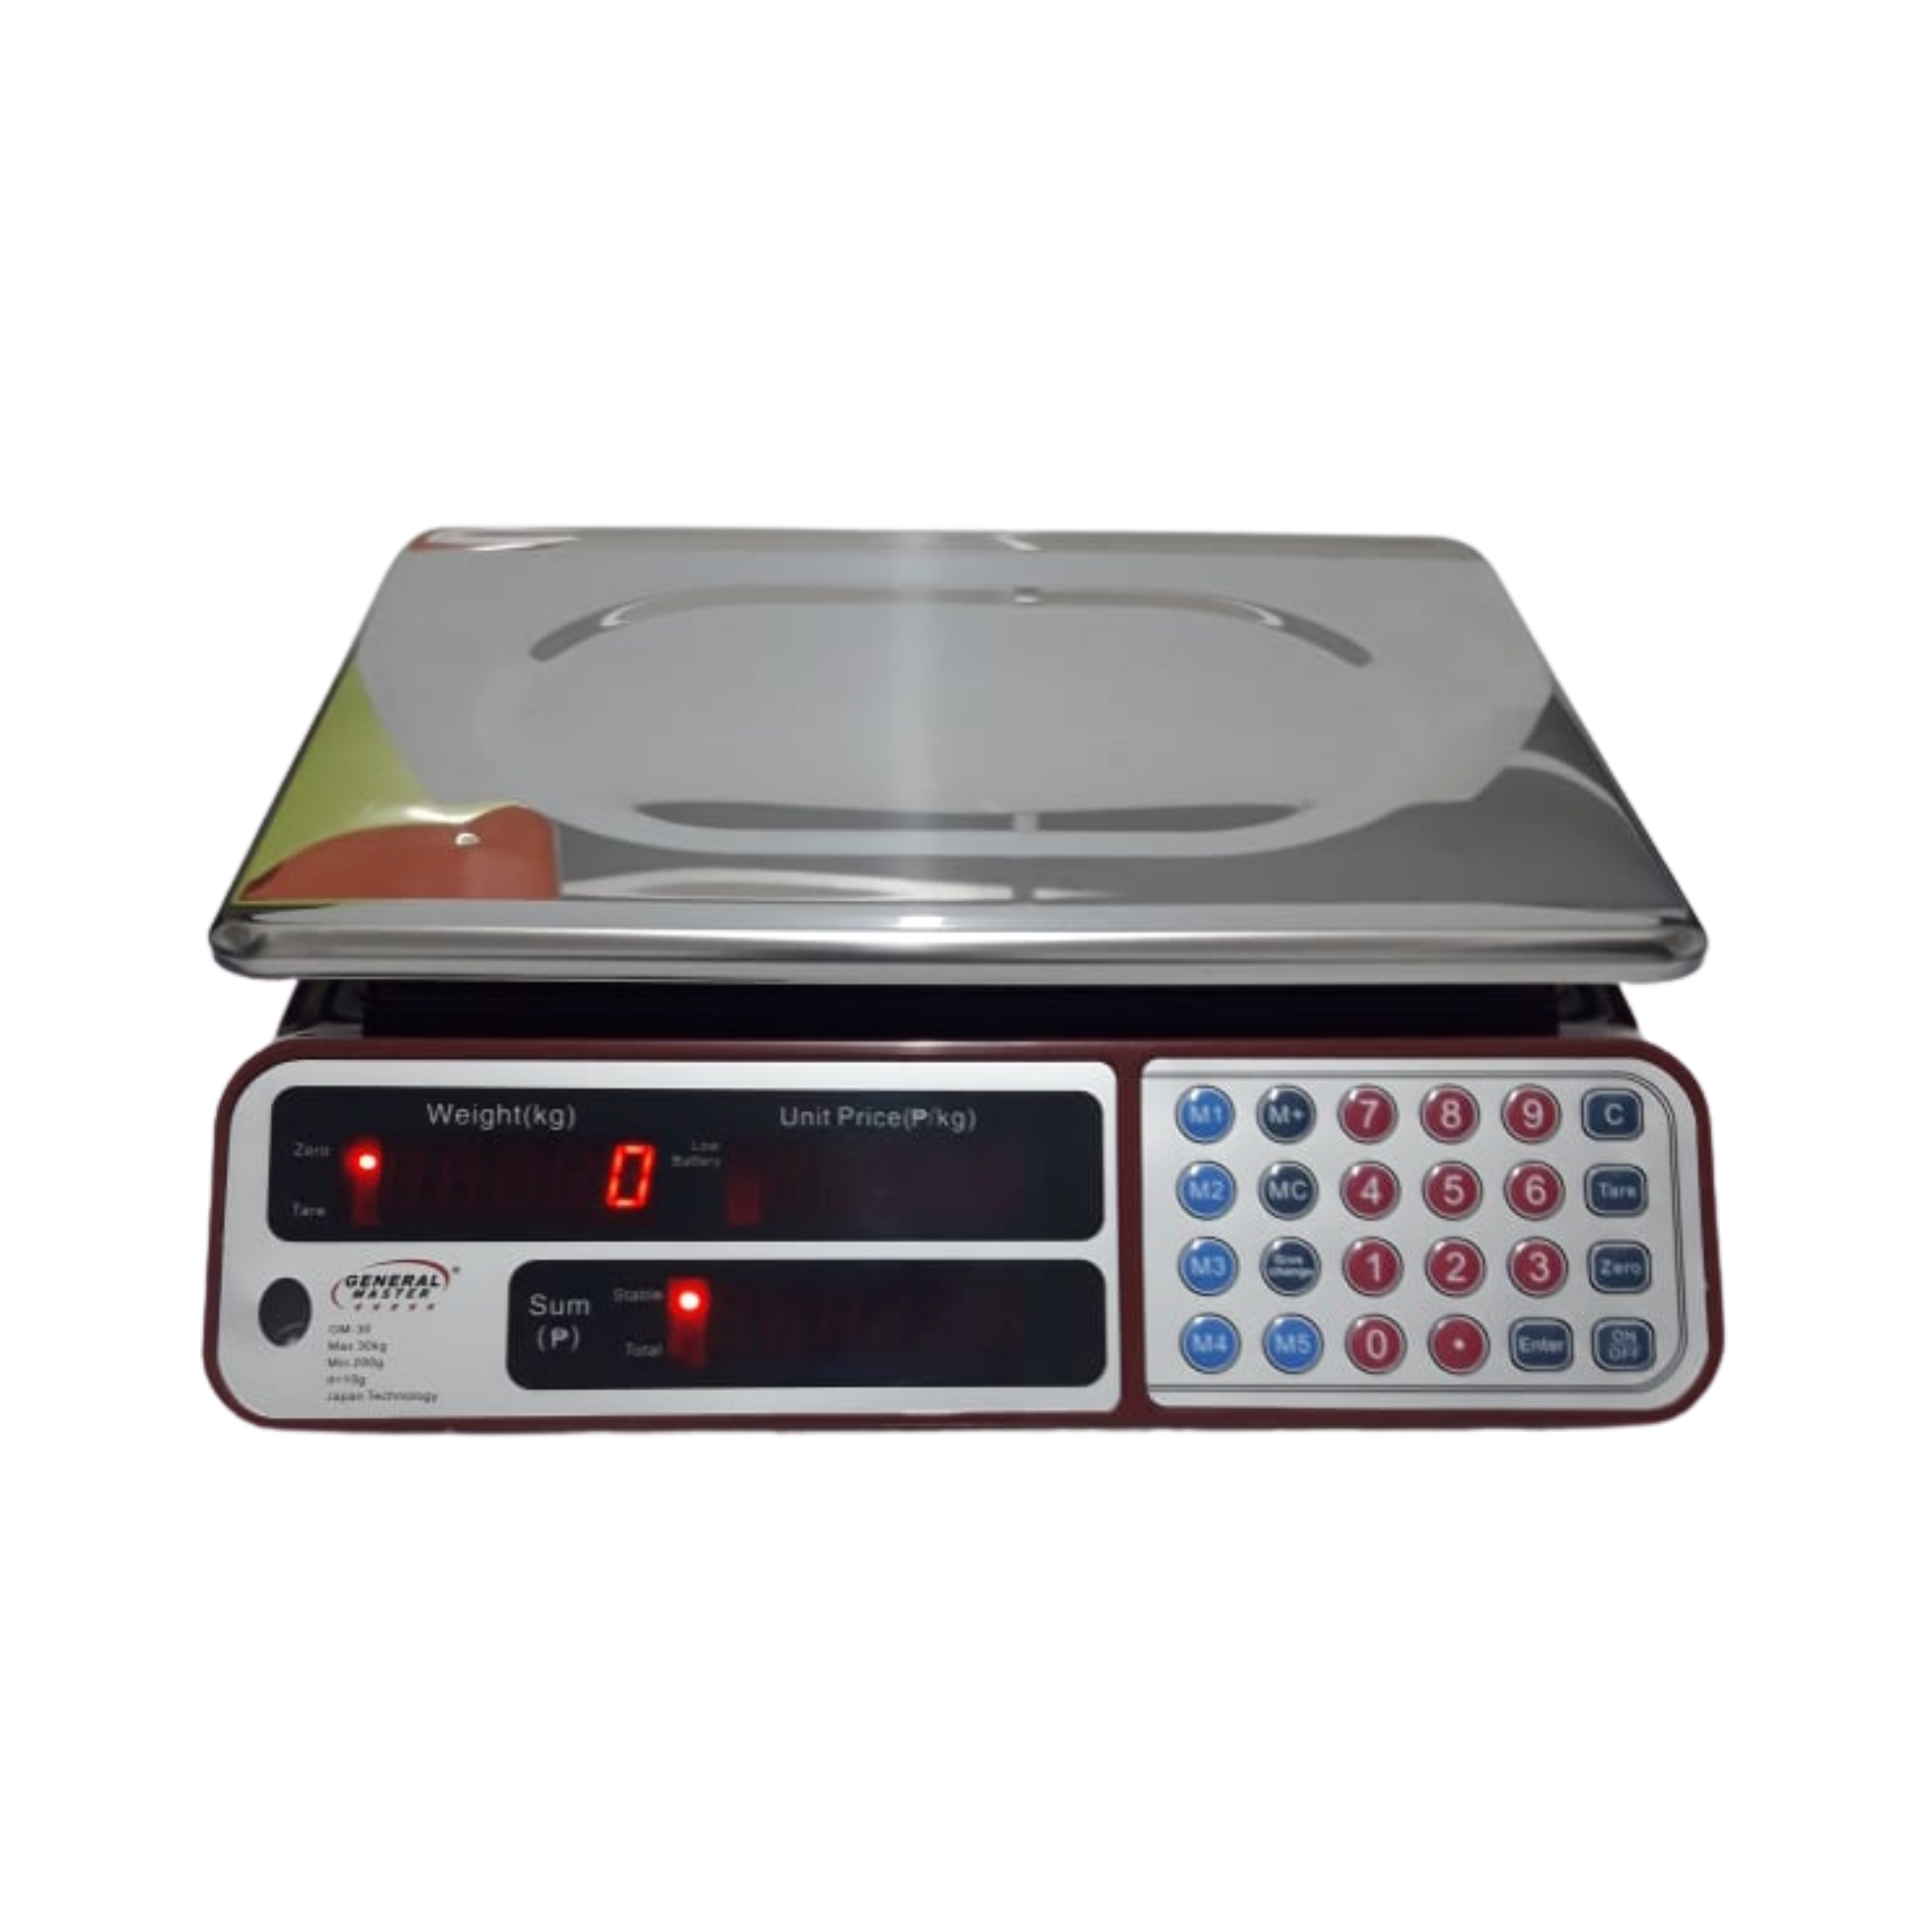 General Digital Weighing Scale - People's Choice Marketing